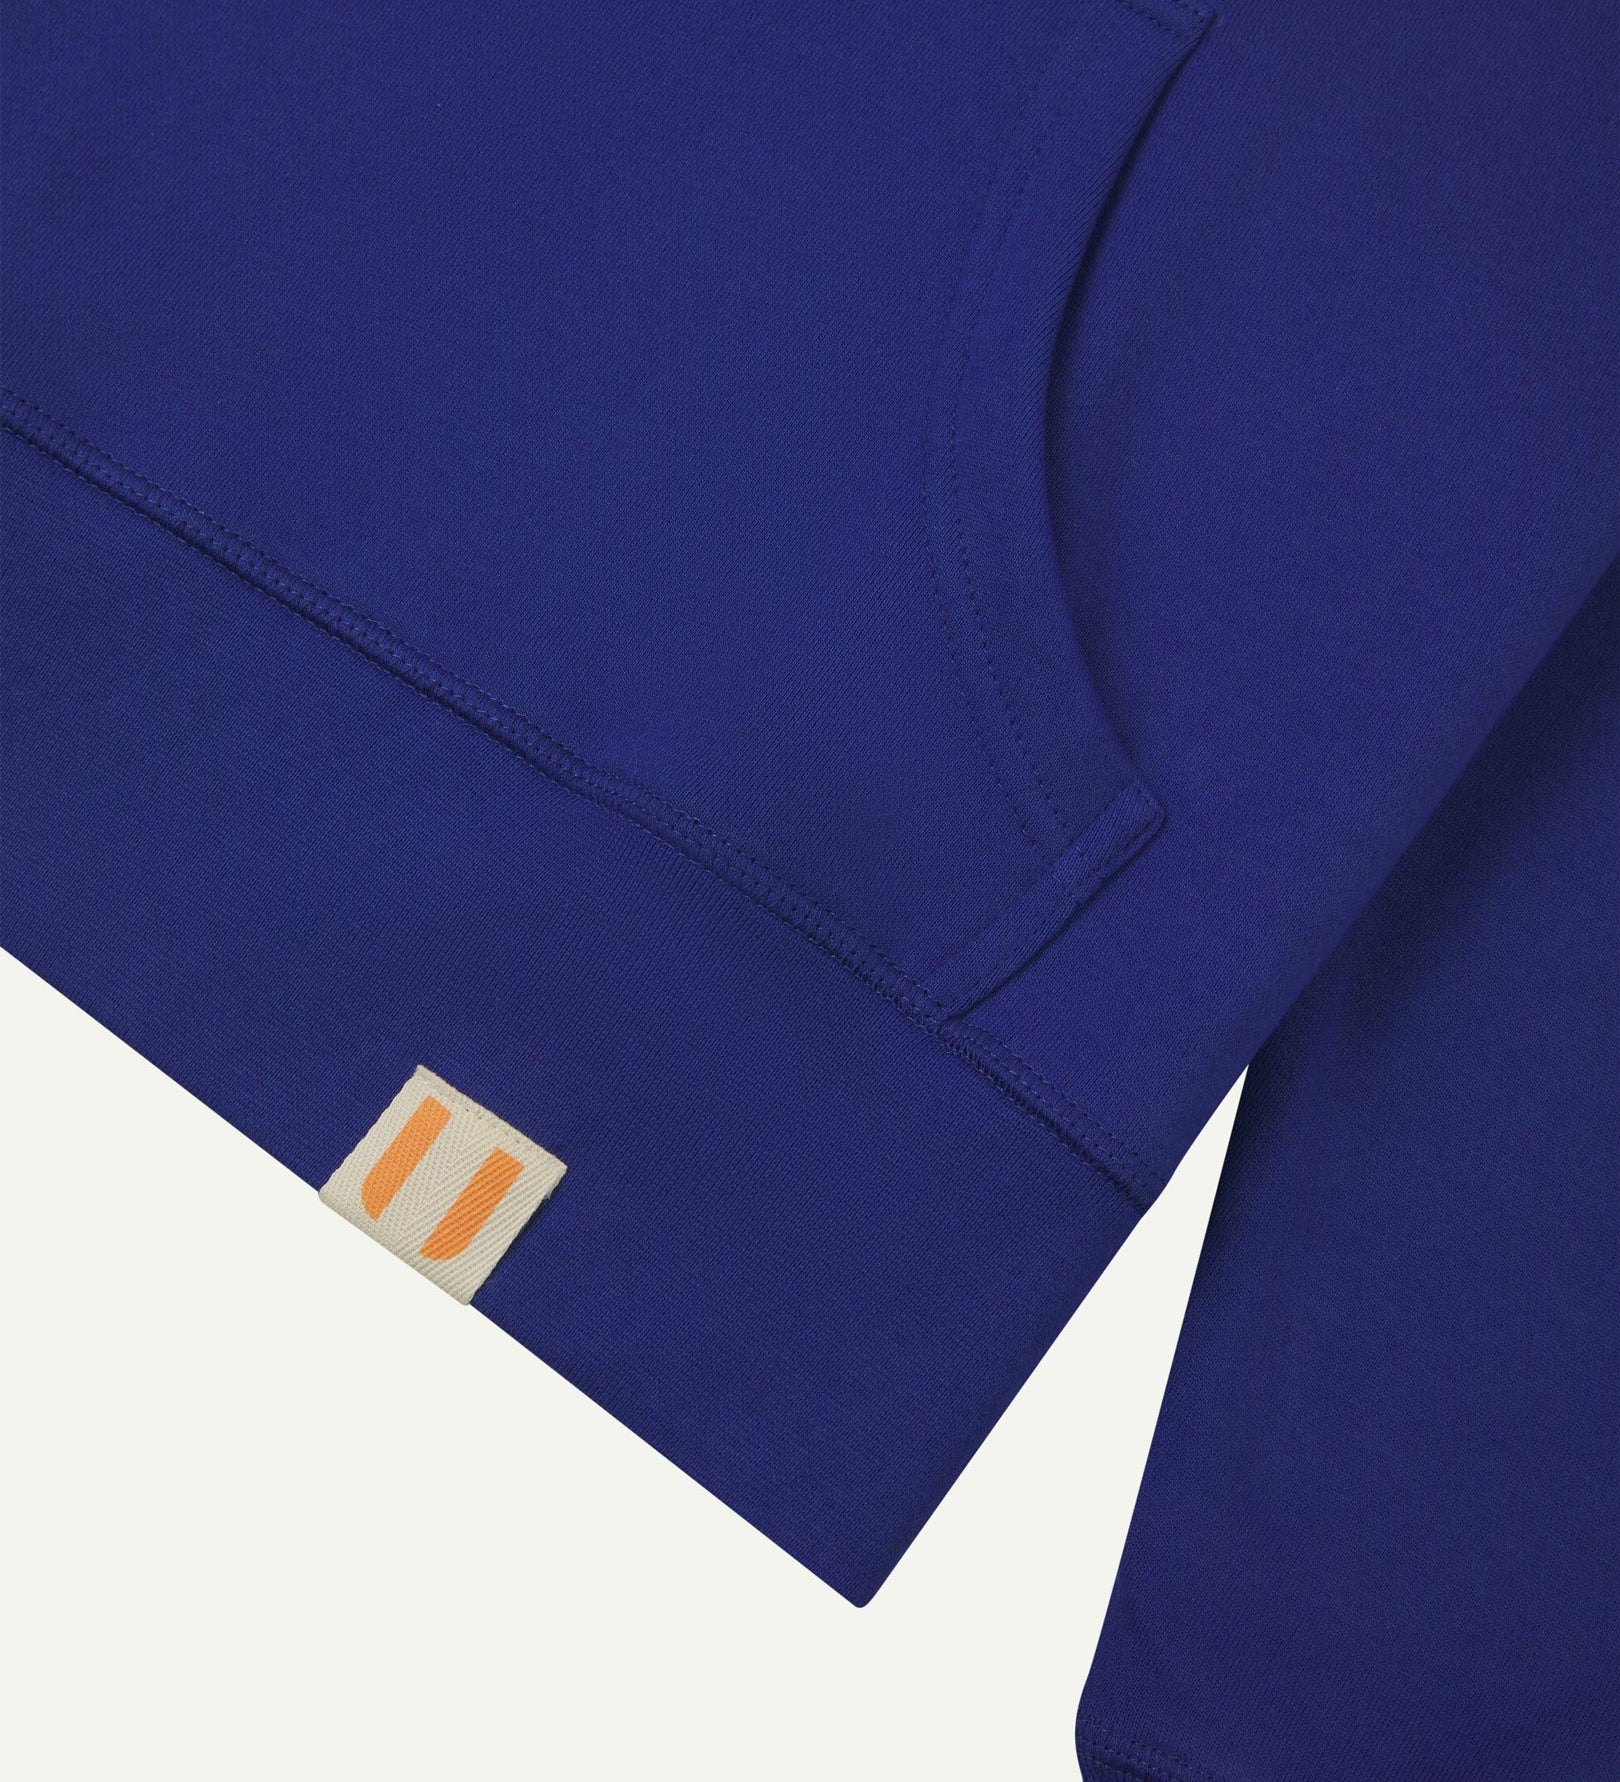 Front close view of Uskees 'ultra blue' hoodie for men with clear view of brand logo on hem and kangaroo front pocket.